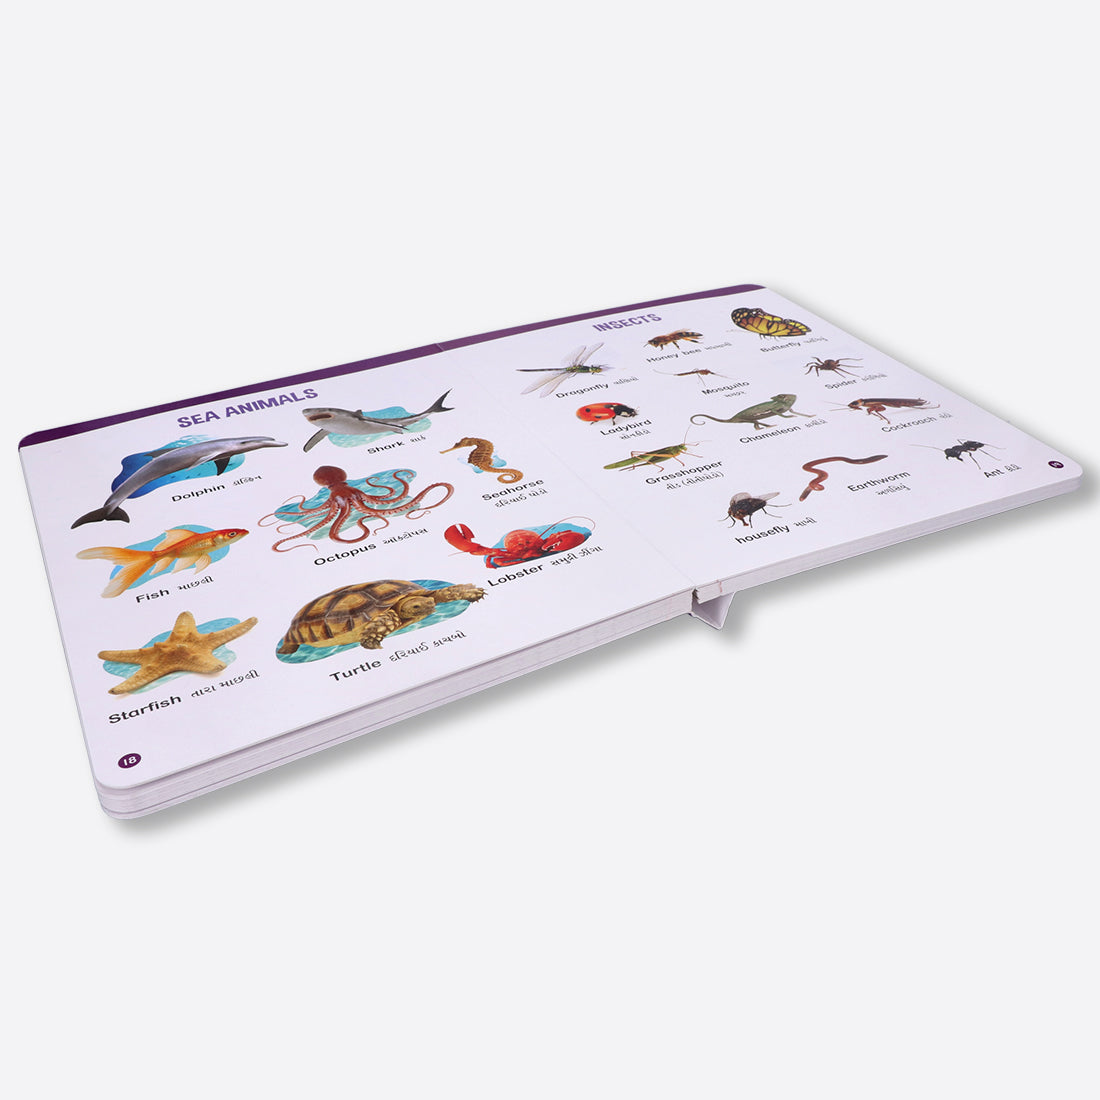 Navneet All In One Board Book (Gujarati) - First Early Learning book for Kindergarten - Picture Board book for toddlers and babies